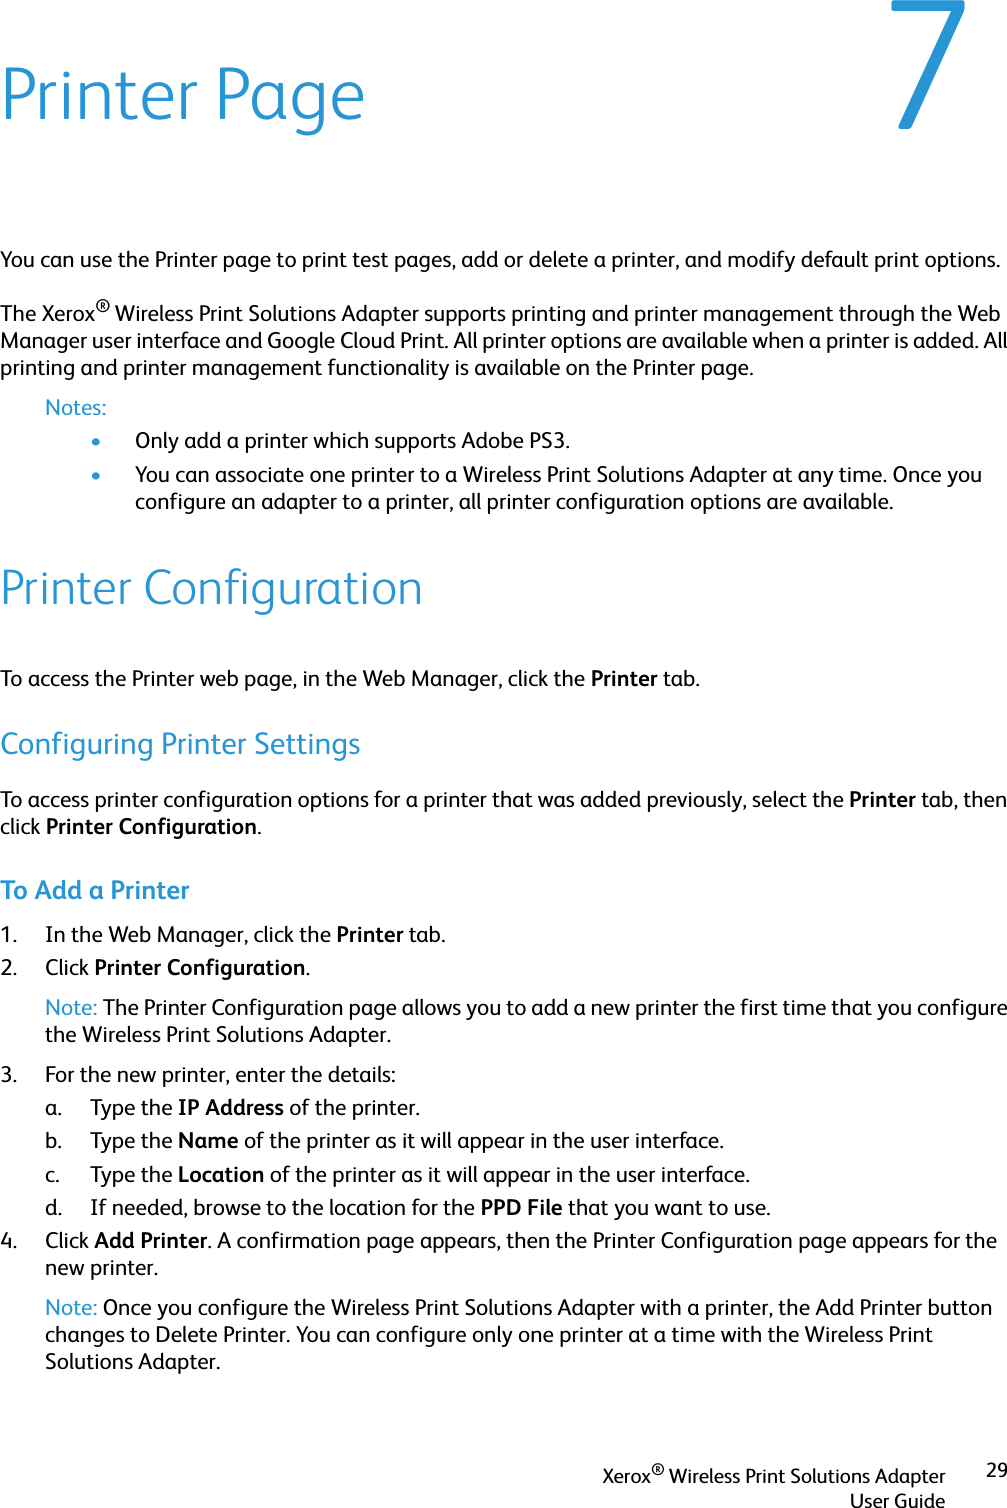 Xerox® Wireless Print Solutions AdapterUser Guide297Printer PageYou can use the Printer page to print test pages, add or delete a printer, and modify default print options.The Xerox® Wireless Print Solutions Adapter supports printing and printer management through the Web Manager user interface and Google Cloud Print. All printer options are available when a printer is added. All printing and printer management functionality is available on the Printer page.Notes:•Only add a printer which supports Adobe PS3.•You can associate one printer to a Wireless Print Solutions Adapter at any time. Once you configure an adapter to a printer, all printer configuration options are available.Printer ConfigurationTo access the Printer web page, in the Web Manager, click the Printer tab.Configuring Printer SettingsTo access printer configuration options for a printer that was added previously, select the Printer tab, then click Printer Configuration.To Add a Printer1. In the Web Manager, click the Printer tab.2. Click Printer Configuration.Note: The Printer Configuration page allows you to add a new printer the first time that you configure the Wireless Print Solutions Adapter.3. For the new printer, enter the details:a. Type the IP Address of the printer.b. Type the Name of the printer as it will appear in the user interface.c. Type the Location of the printer as it will appear in the user interface.d. If needed, browse to the location for the PPD File that you want to use.4. Click Add Printer. A confirmation page appears, then the Printer Configuration page appears for the new printer.Note: Once you configure the Wireless Print Solutions Adapter with a printer, the Add Printer button changes to Delete Printer. You can configure only one printer at a time with the Wireless Print Solutions Adapter.